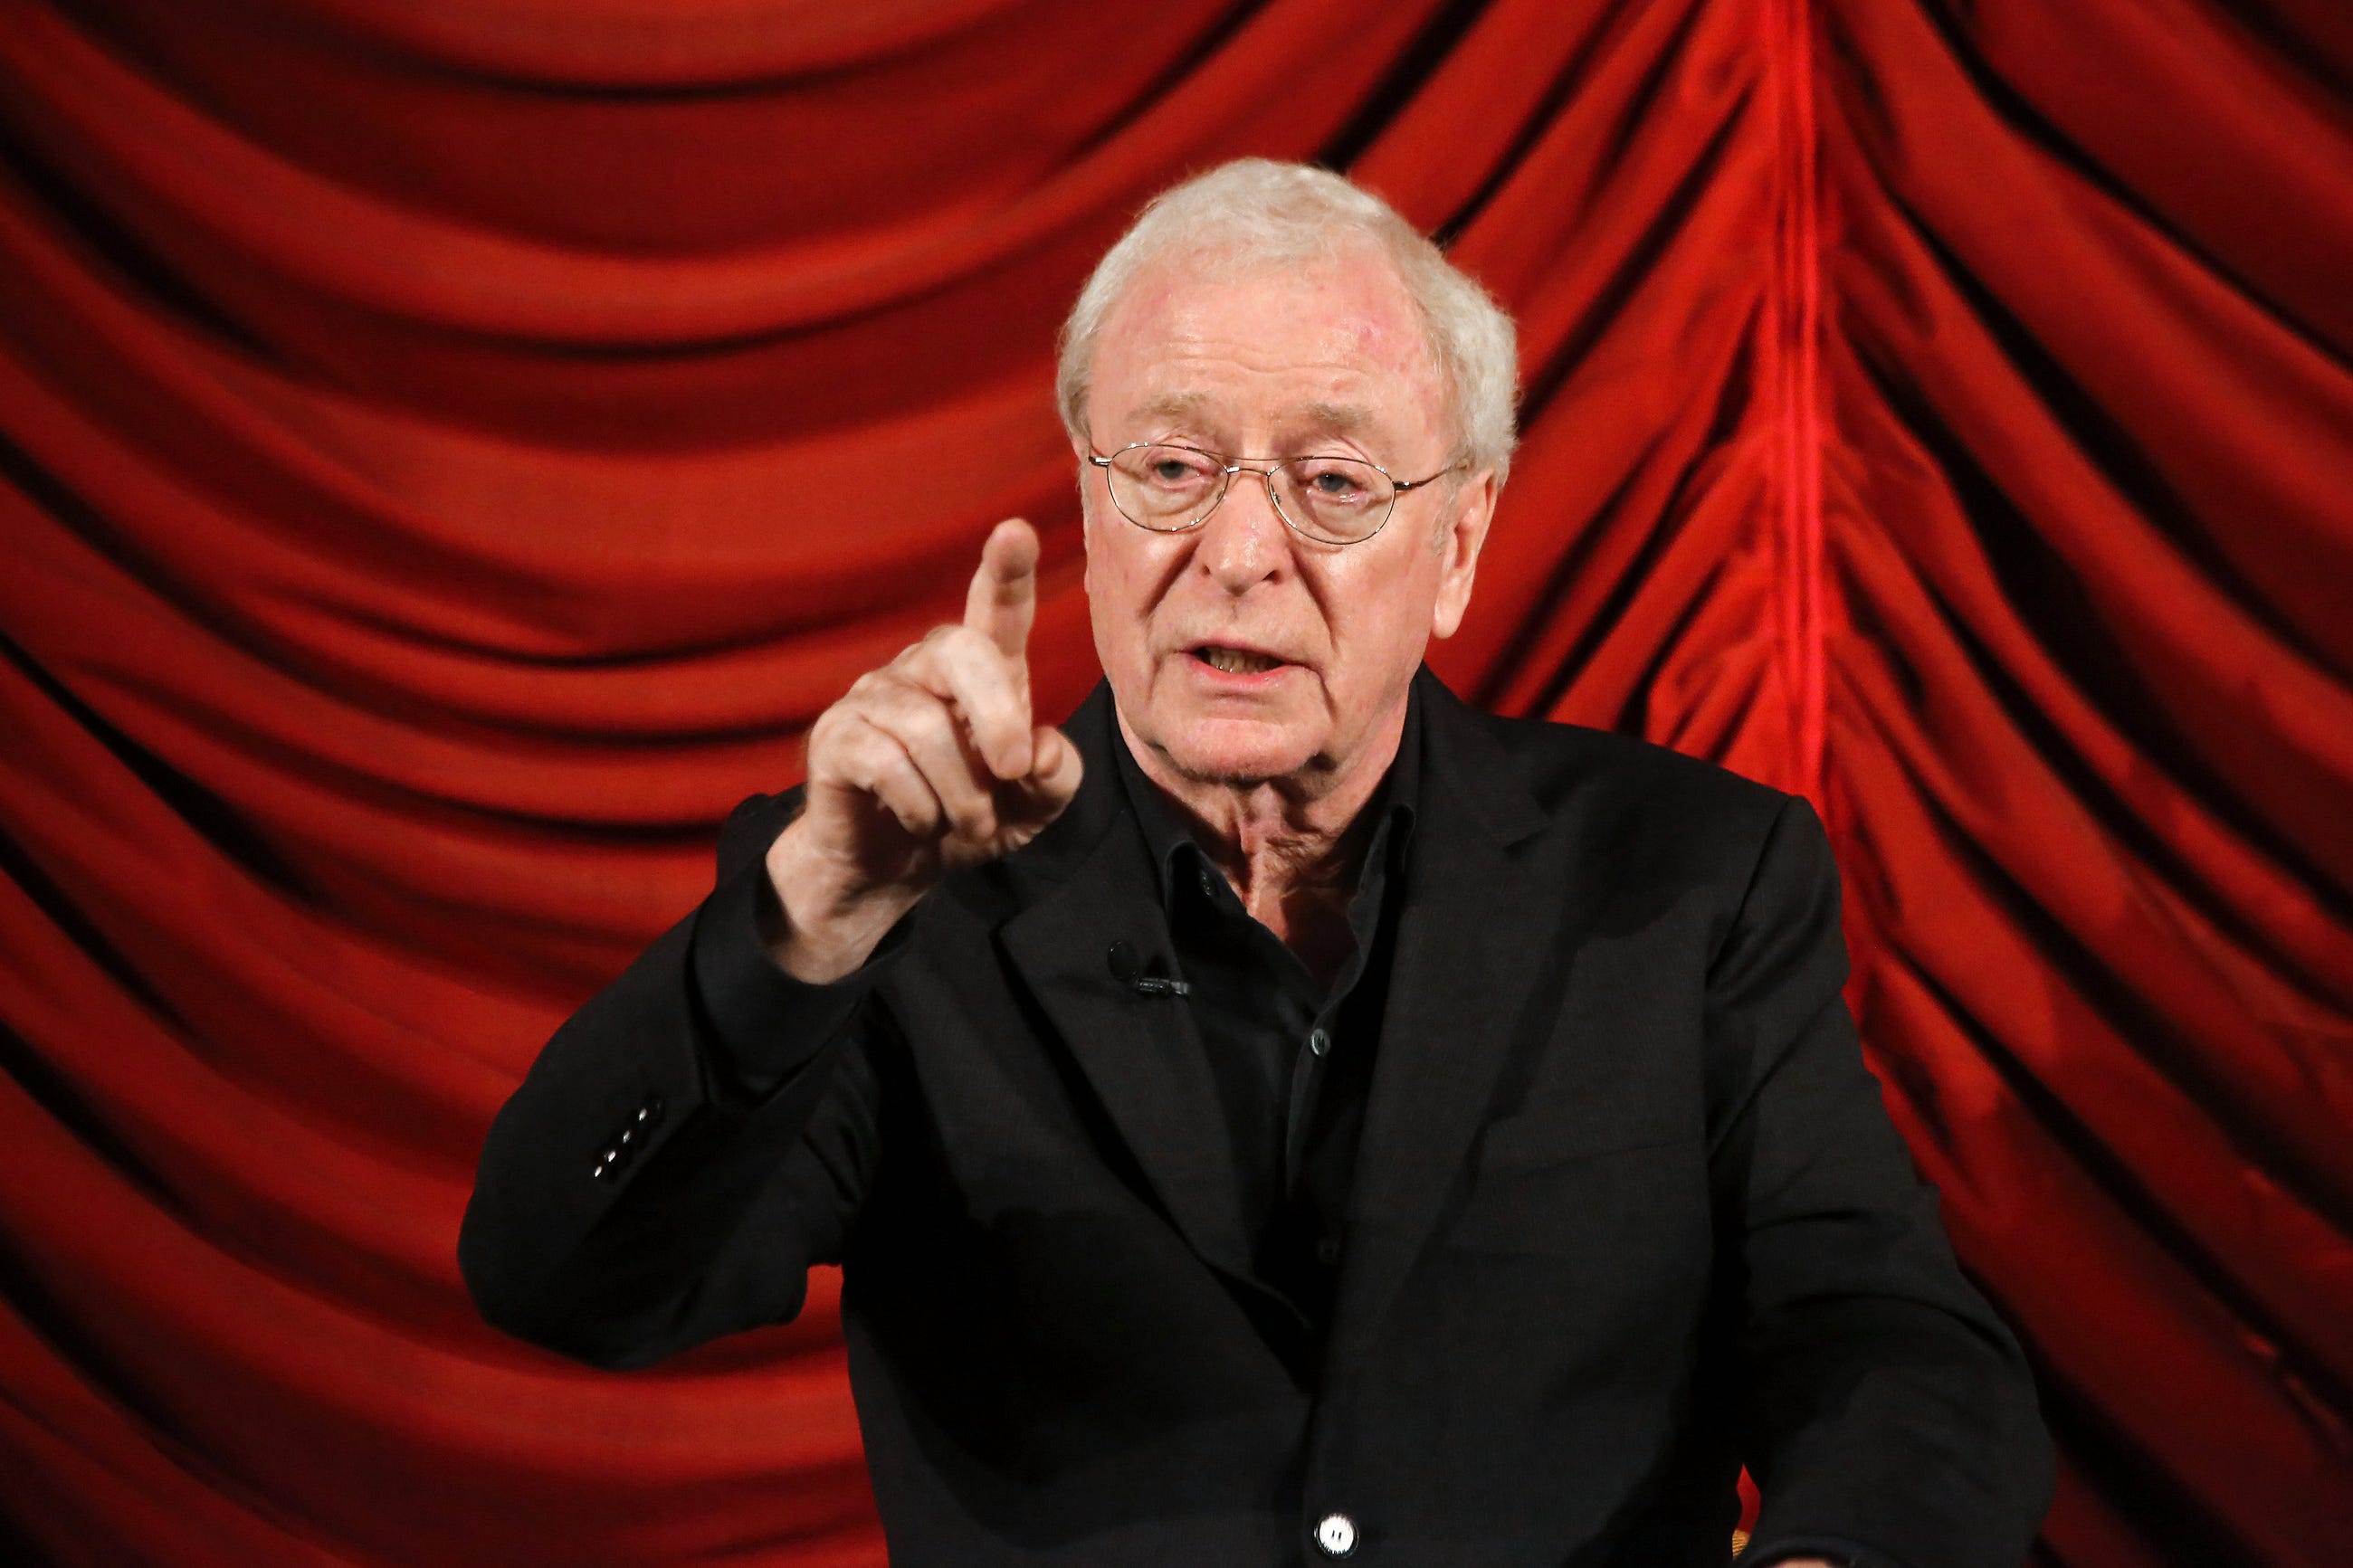 Michael Caine Shares His Simple Philosophy For Dealing With Difficulty